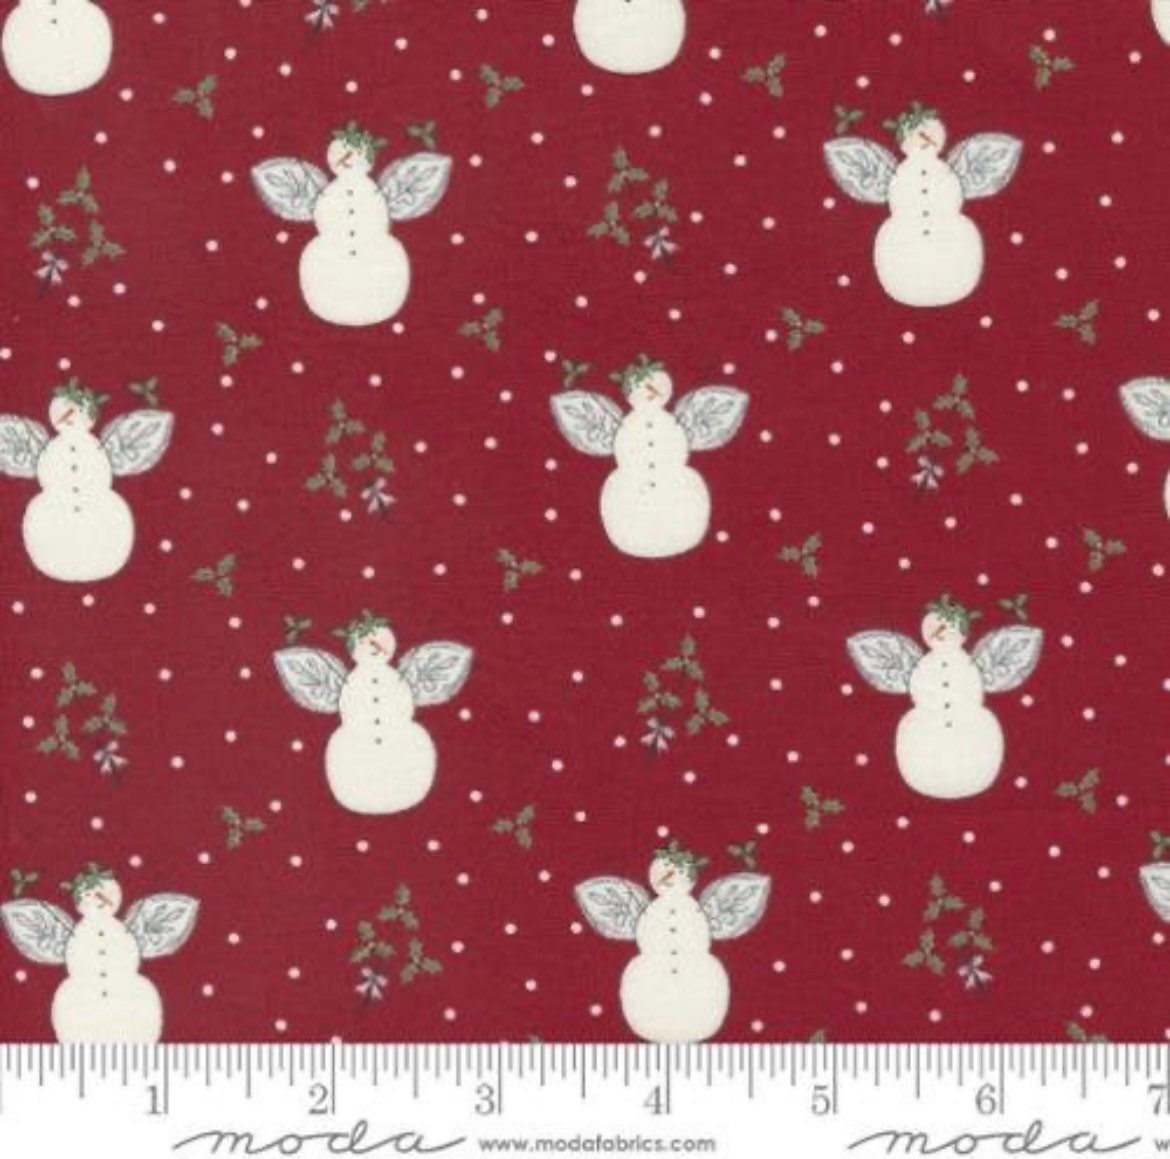 I Believe in Angels 3000-12 Cardinal by Bunny Hill Designs - Moda - 100% Cotton